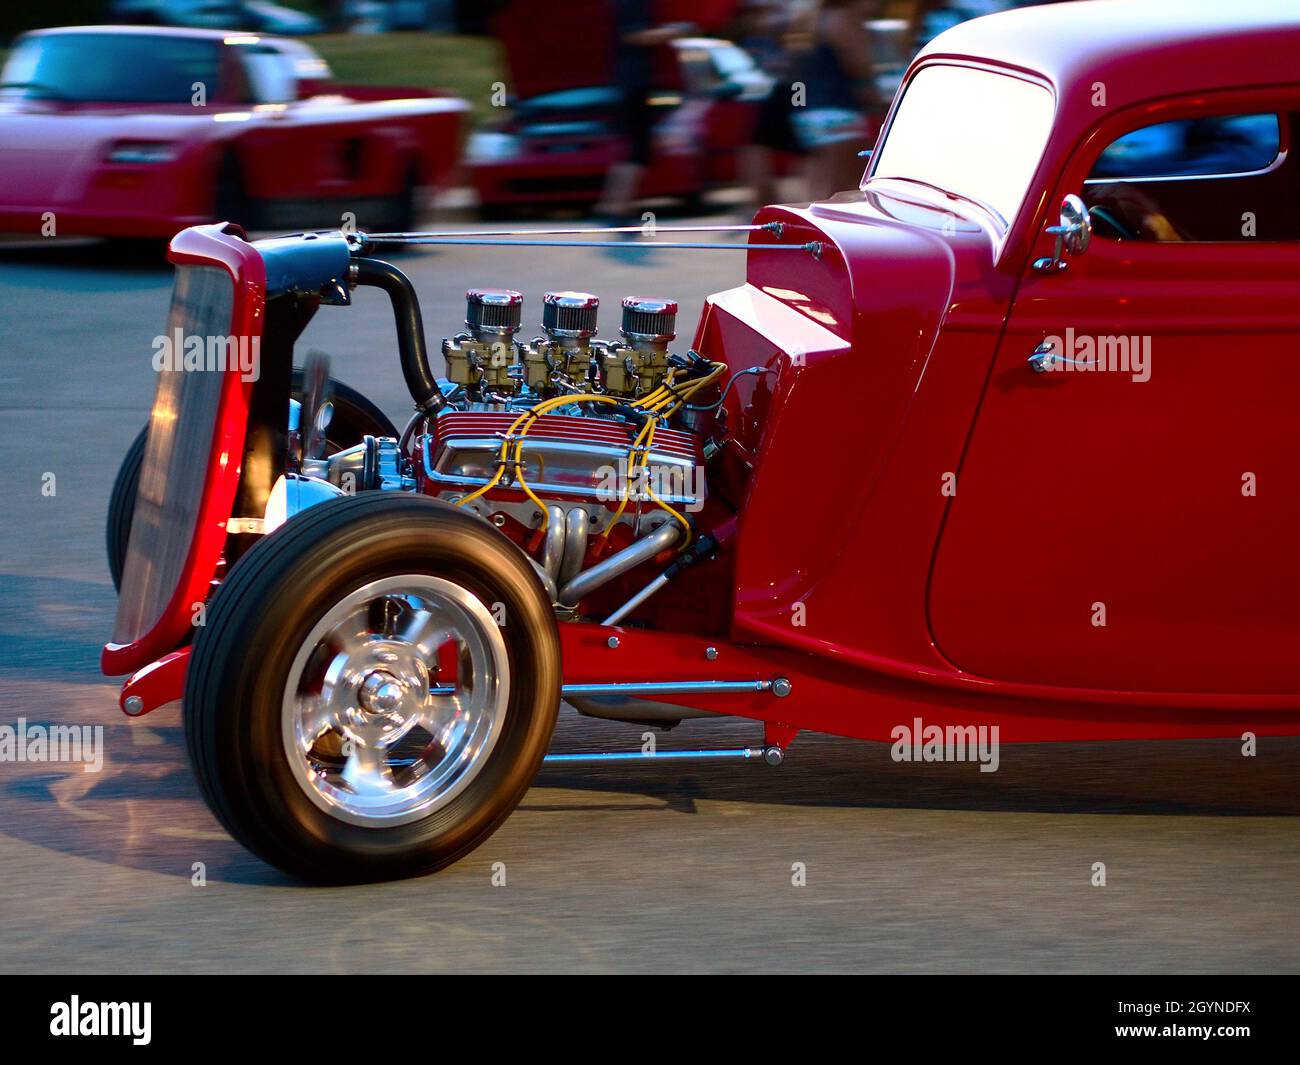 KANSAS CITY, UNITED STATES - Jul 14, 2013: A selective focus shot of a red classic V8 engine automobile driving Stock Photo